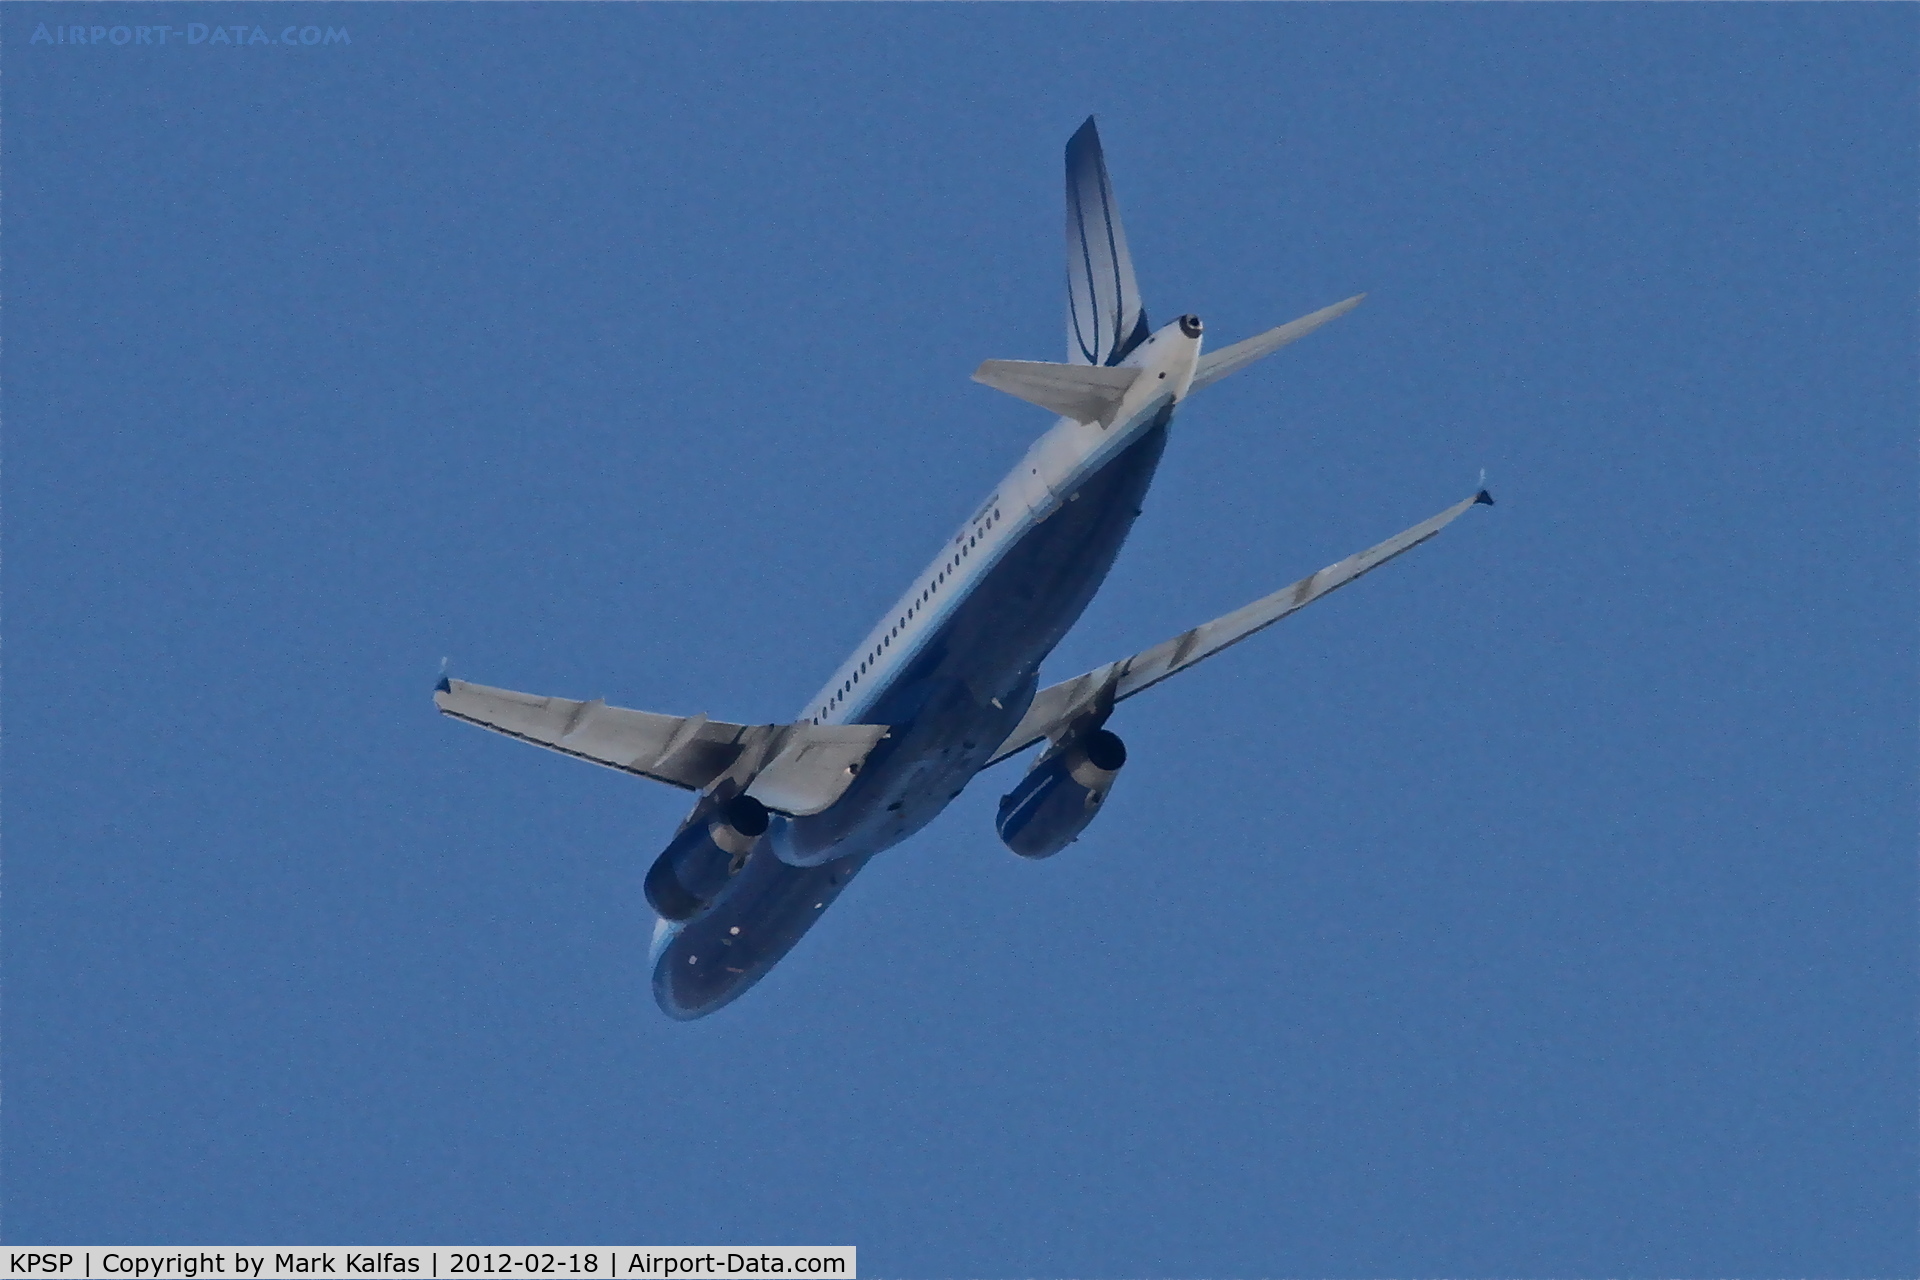 Palm Springs International Airport (PSP) - United Airlines Airbus A320 departing Palm Springs RWY 13R.